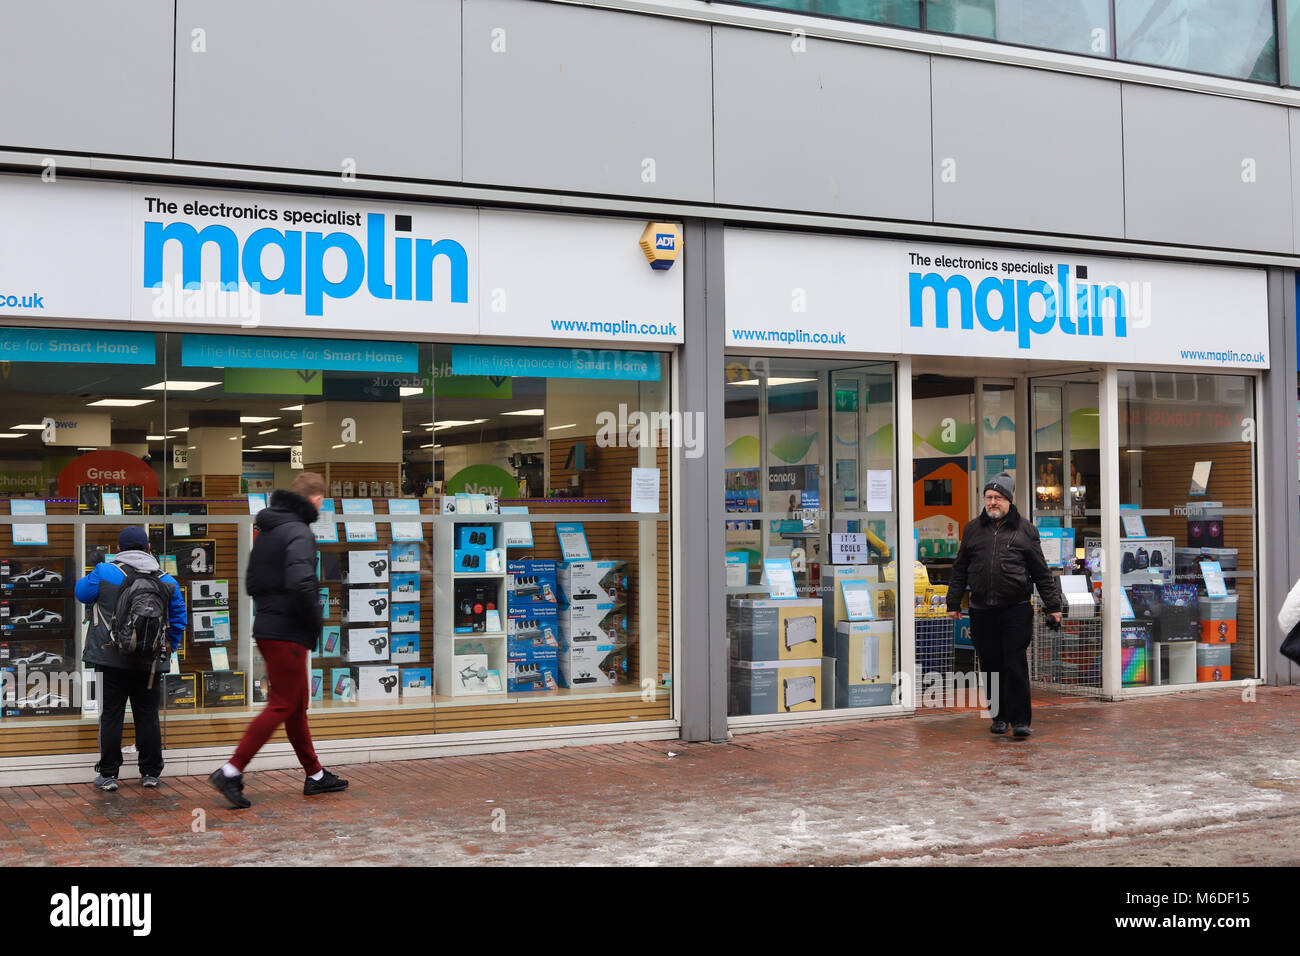 Ipswich, Suffolk. 3rd March 2018. UK News: Maplin electronic goods store still trading despite reported financial difficulties. Ipswich, Suffolk. Credit: Angela Chalmers/Alamy Live News Stock Photo